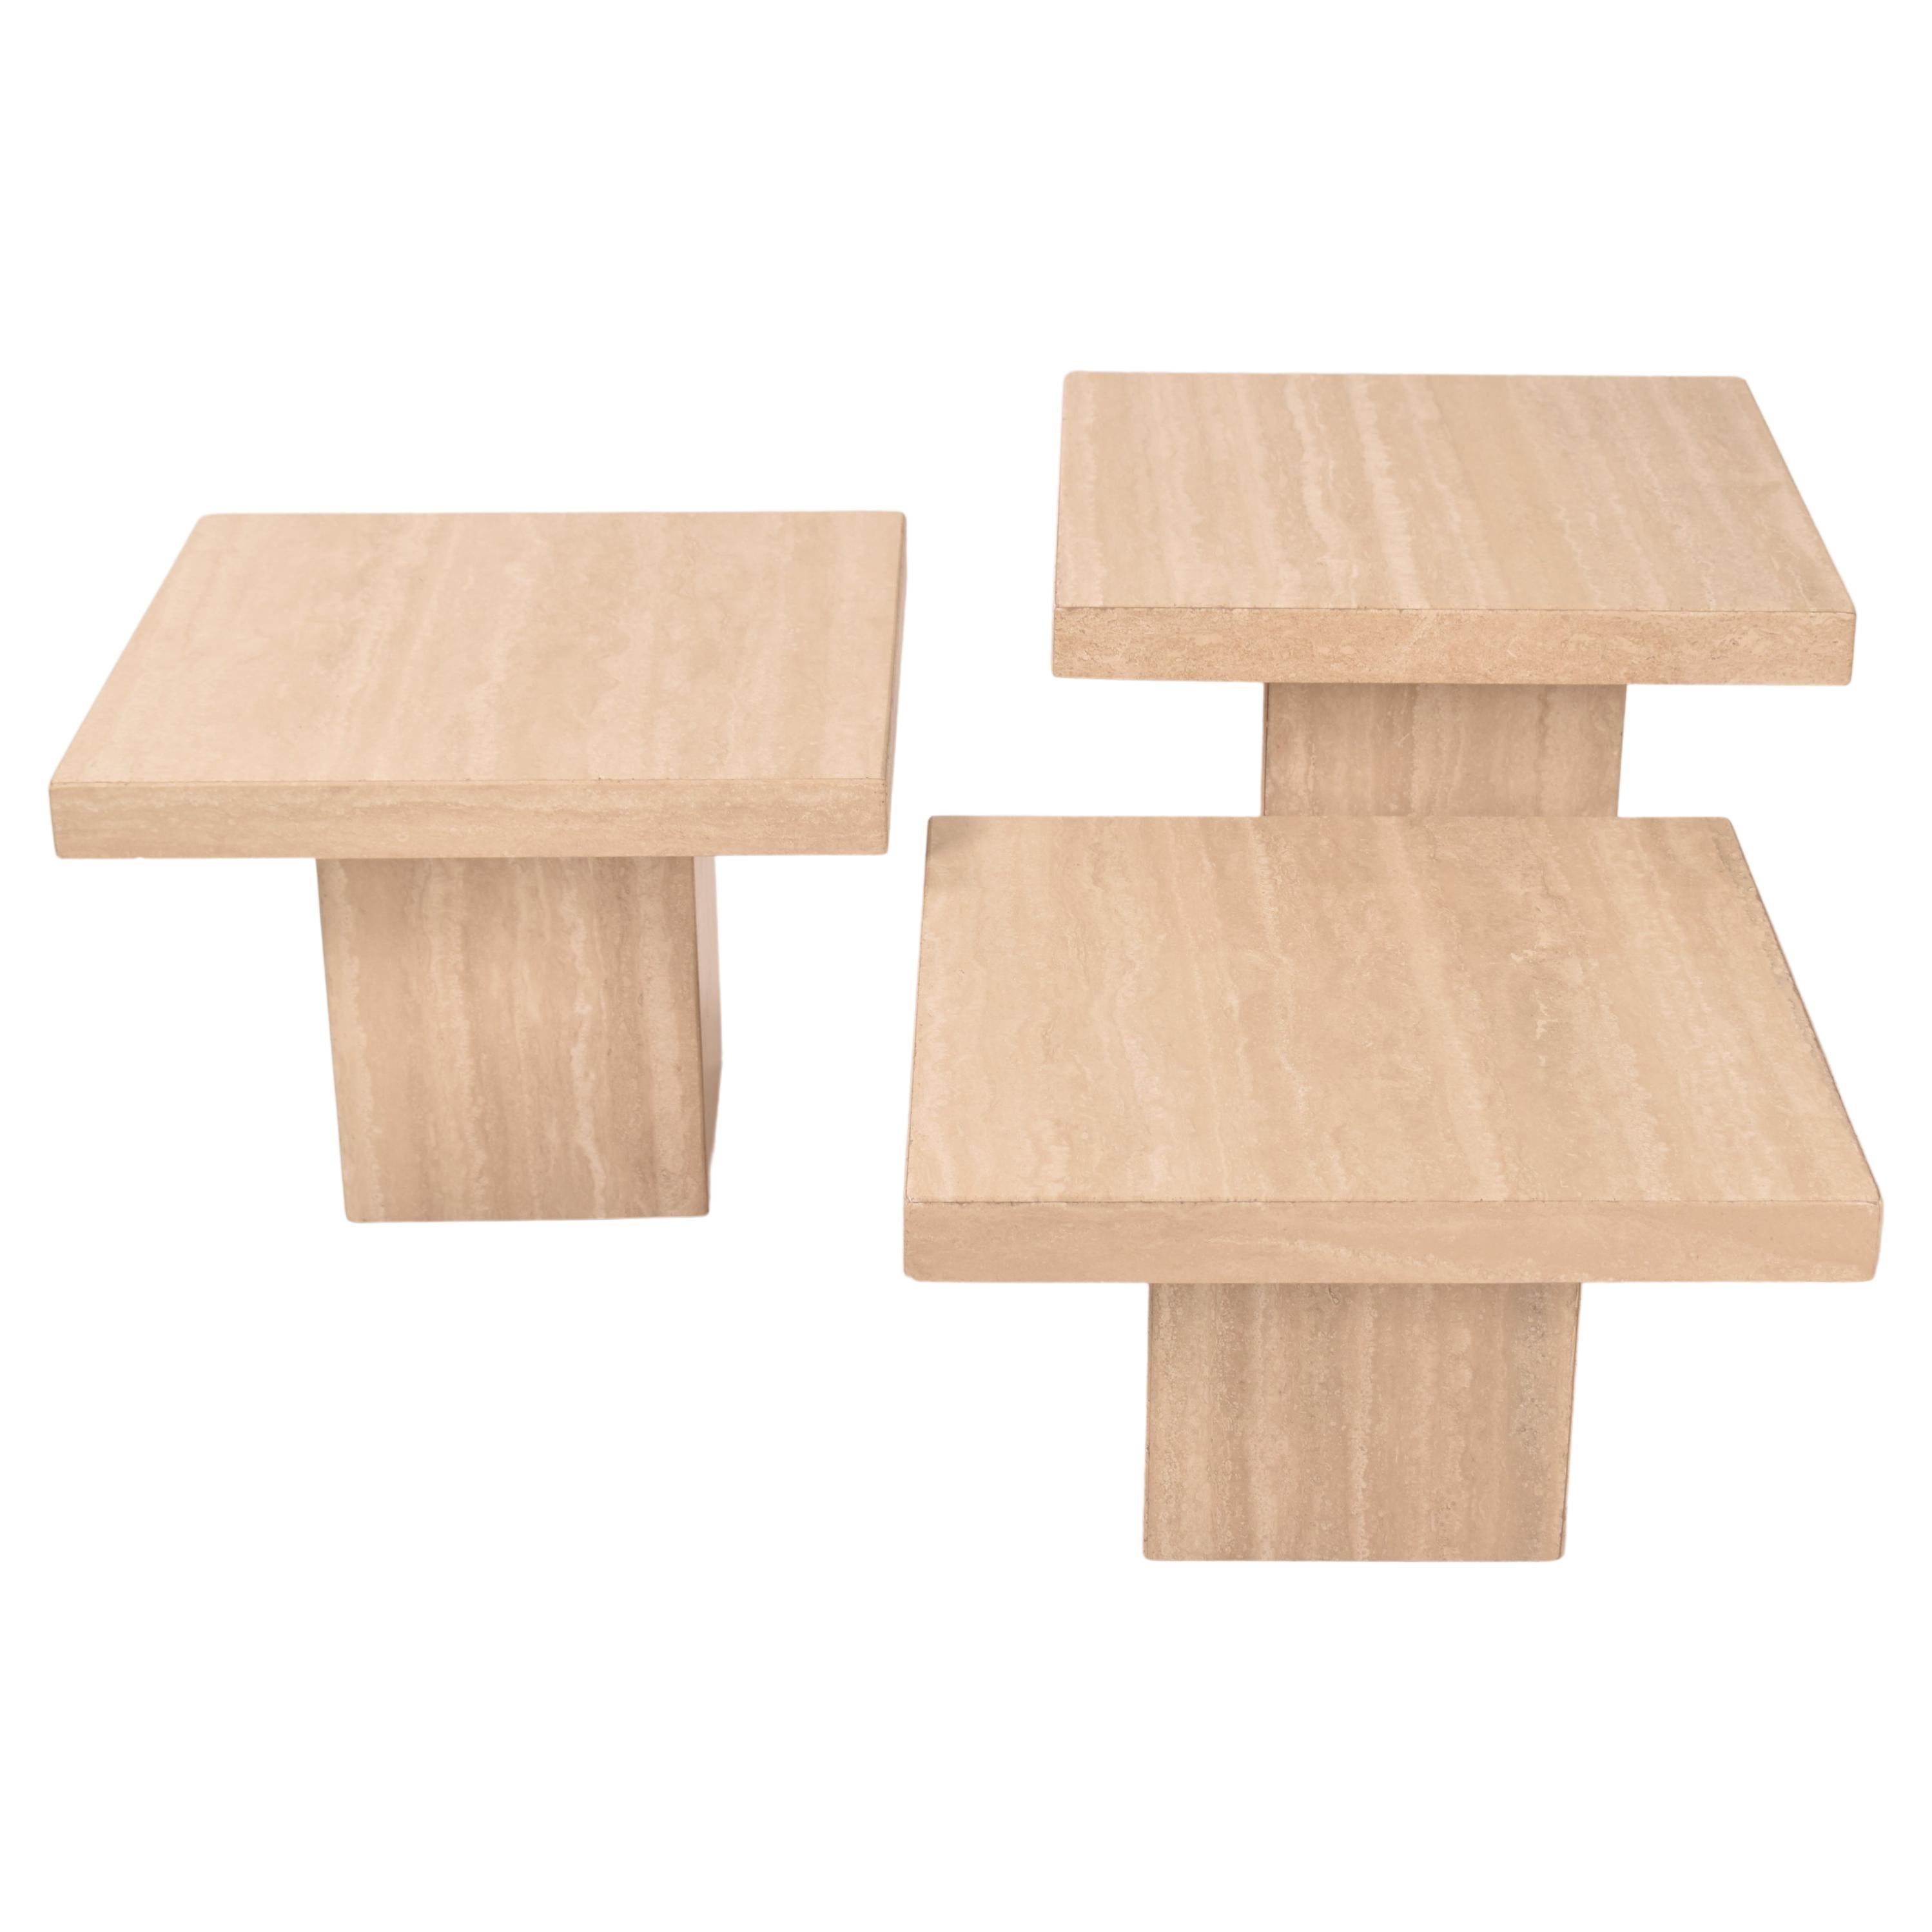 Set of Three Tiered Square Coffee Tables, in Cream Travertine, Italy, 1970